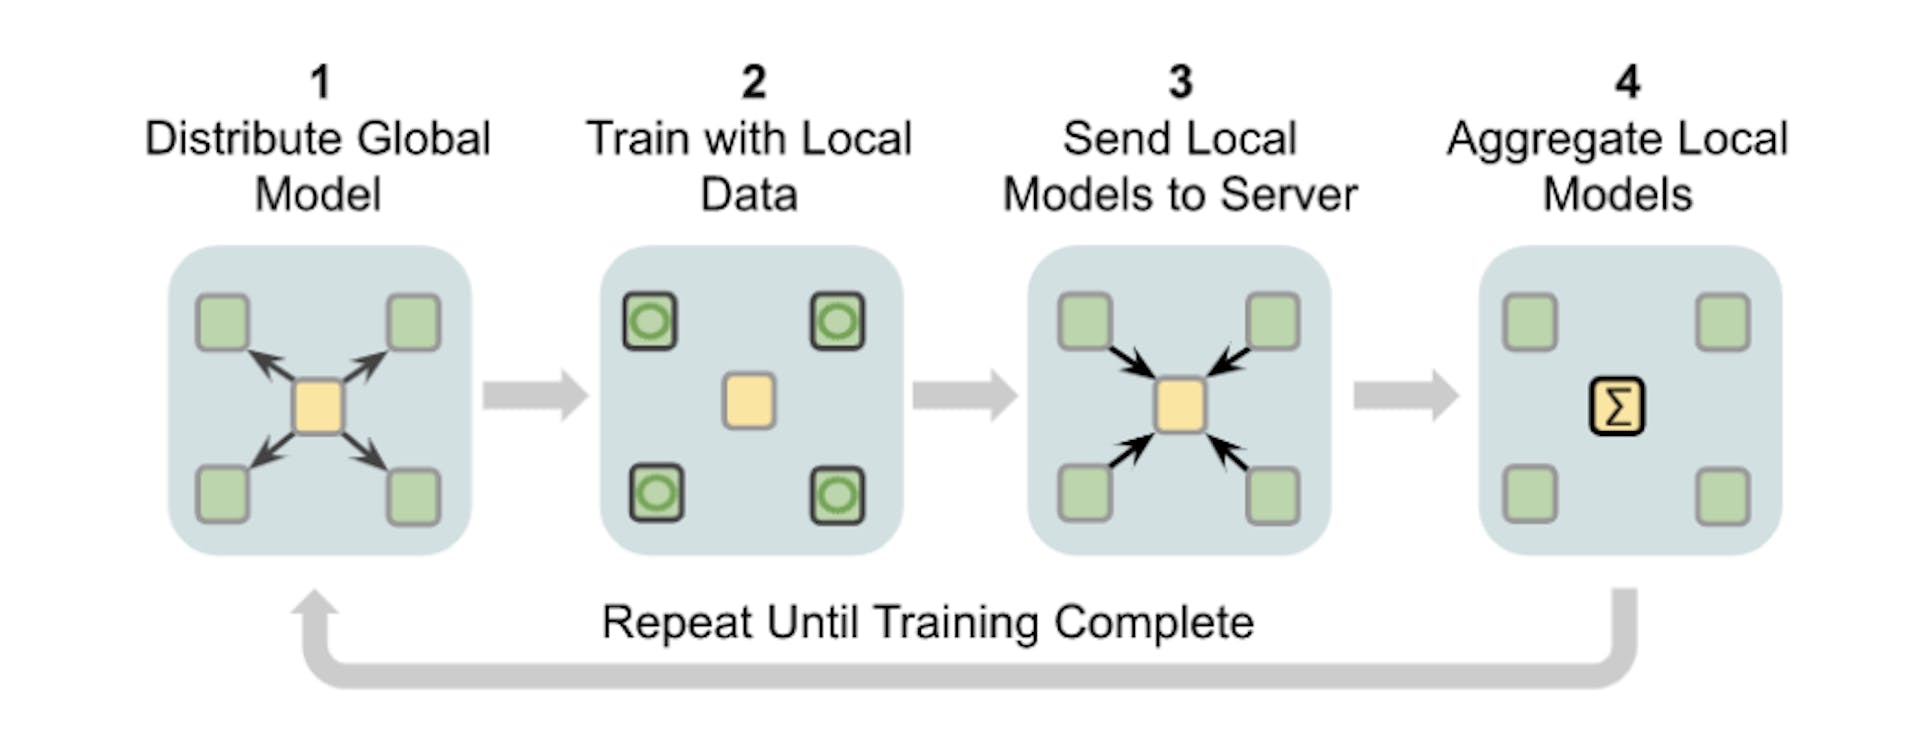 Figure 2: Typical federated learning workflow Wang and Preininger (2019)